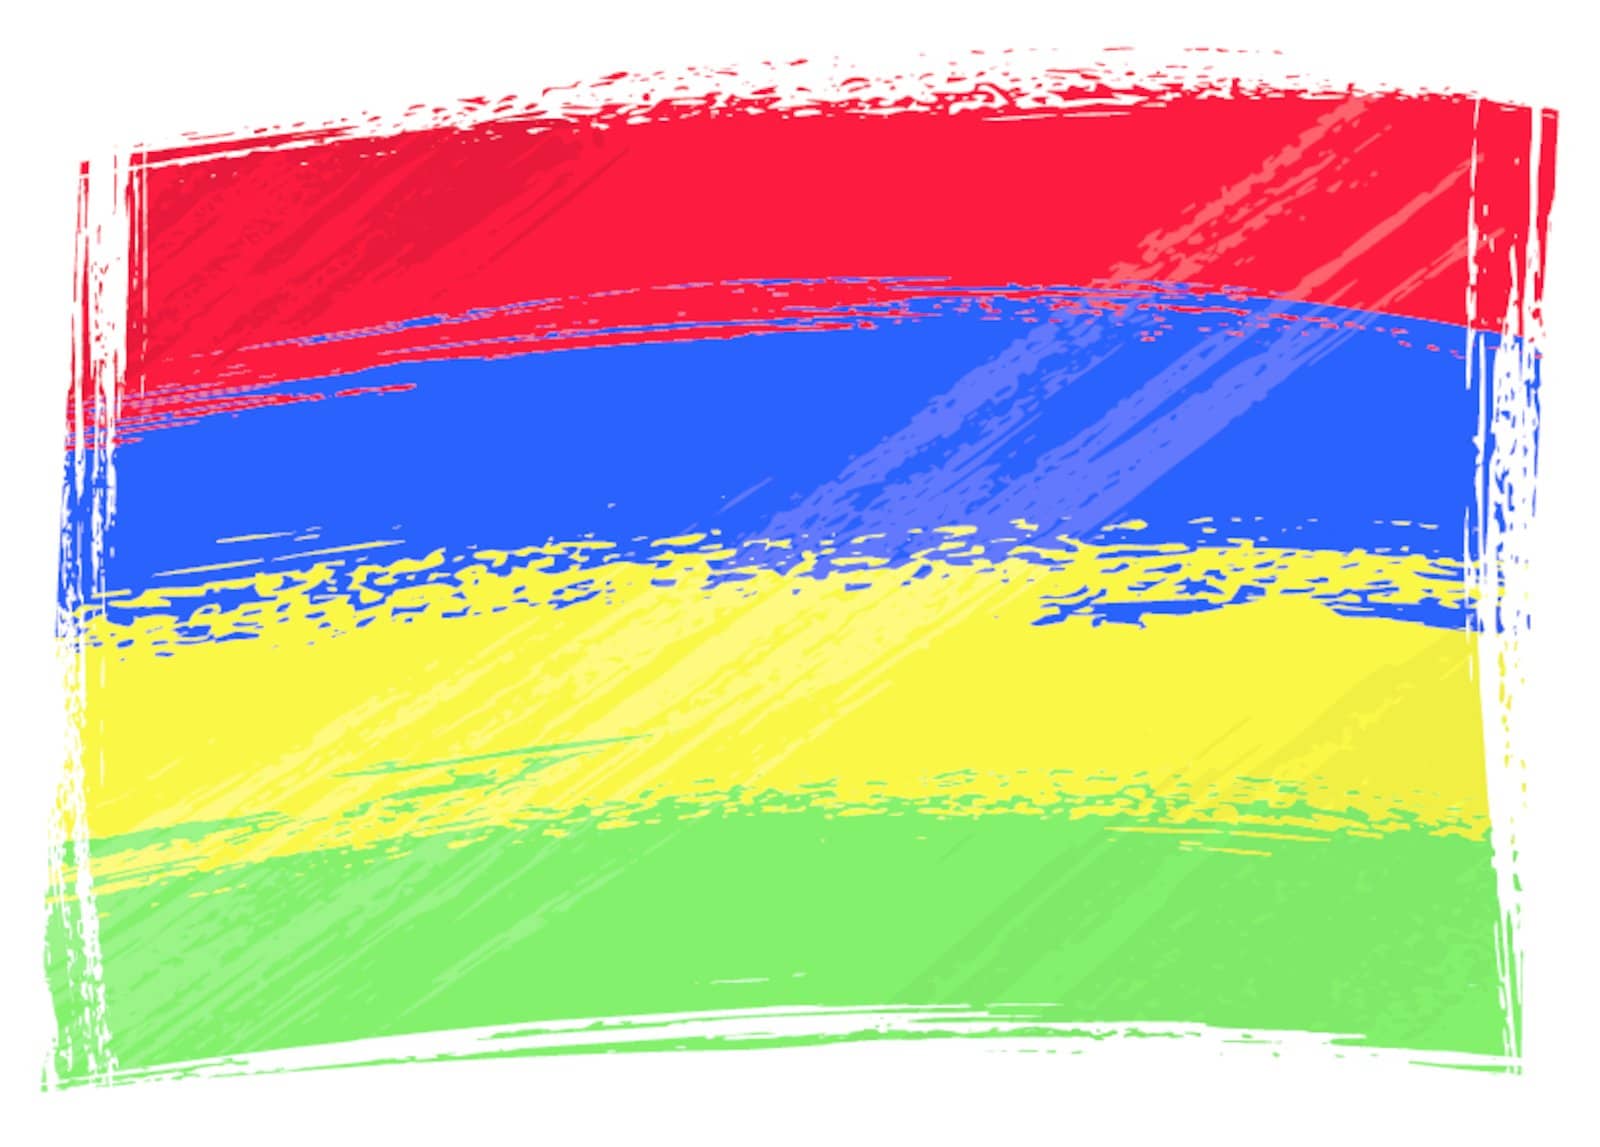 Mauritius national flag created in grunge style
